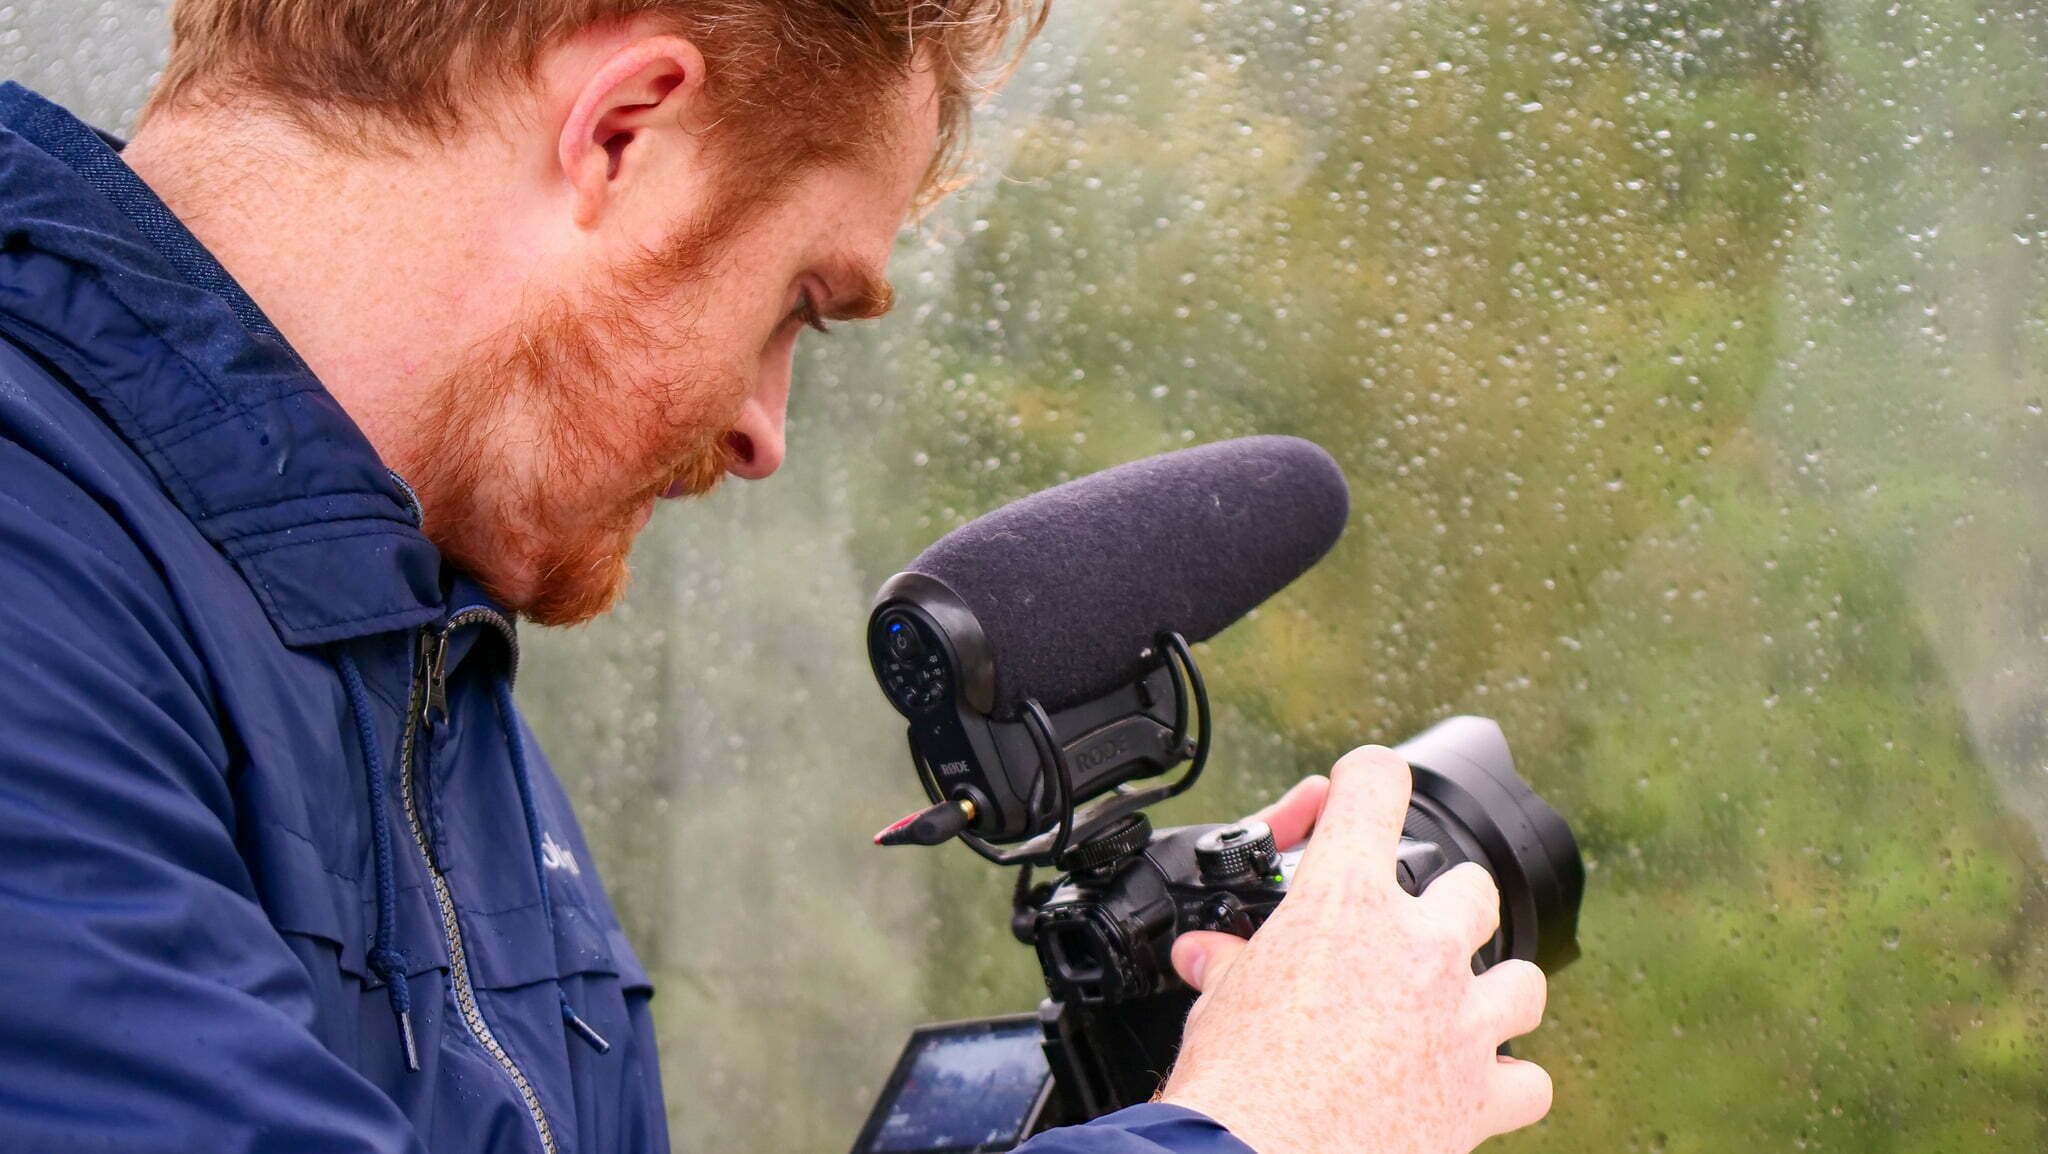 Nomadic Samuel recording travel videos in Germany on a rainy day